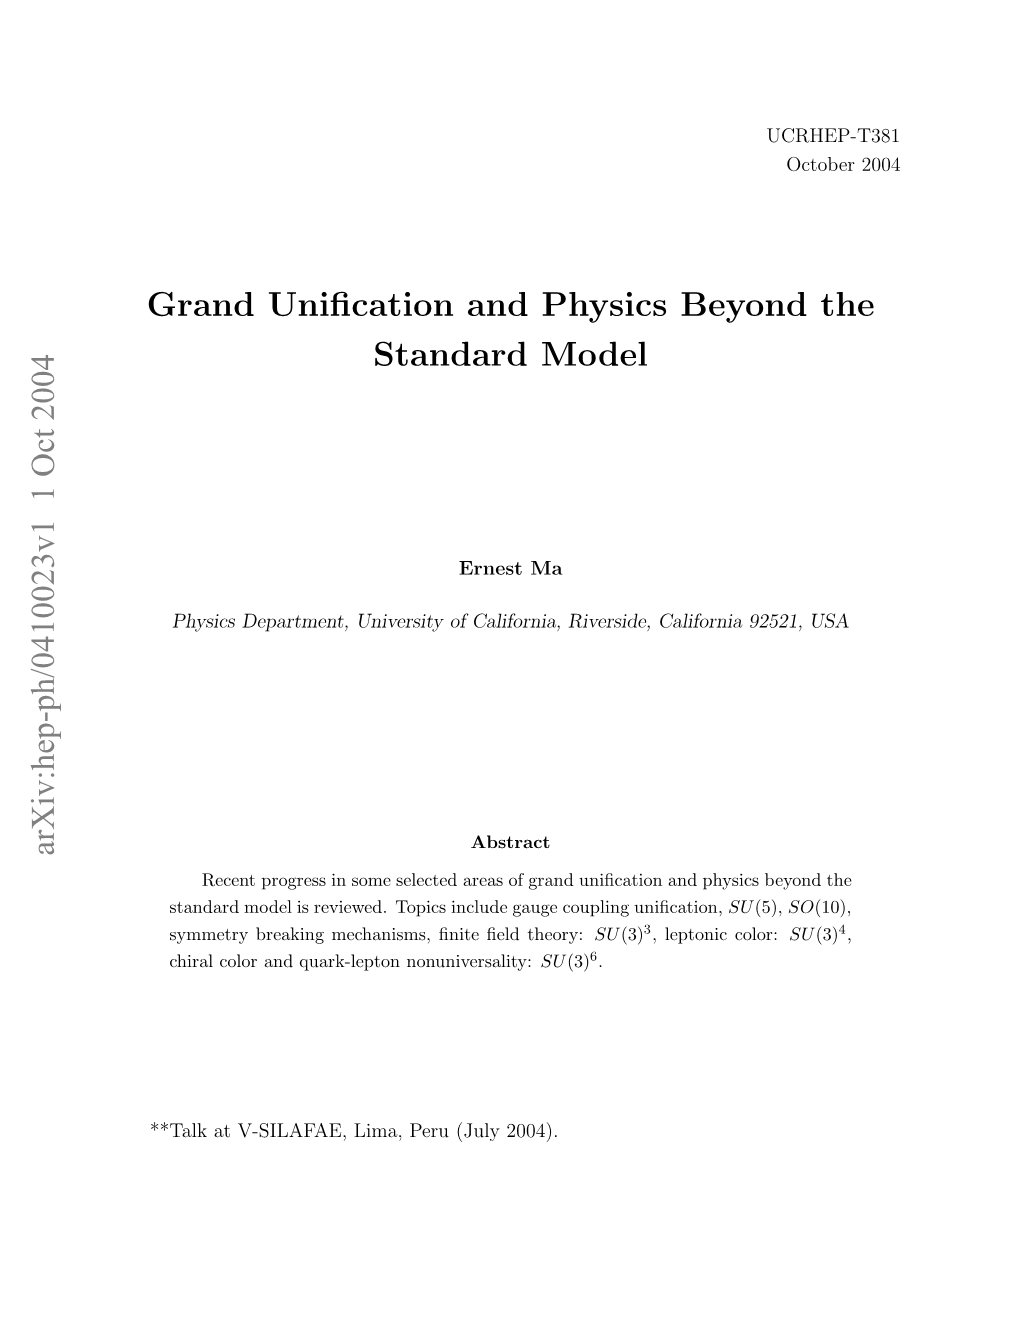 Grand Unification and Physics Beyond the Standard Model